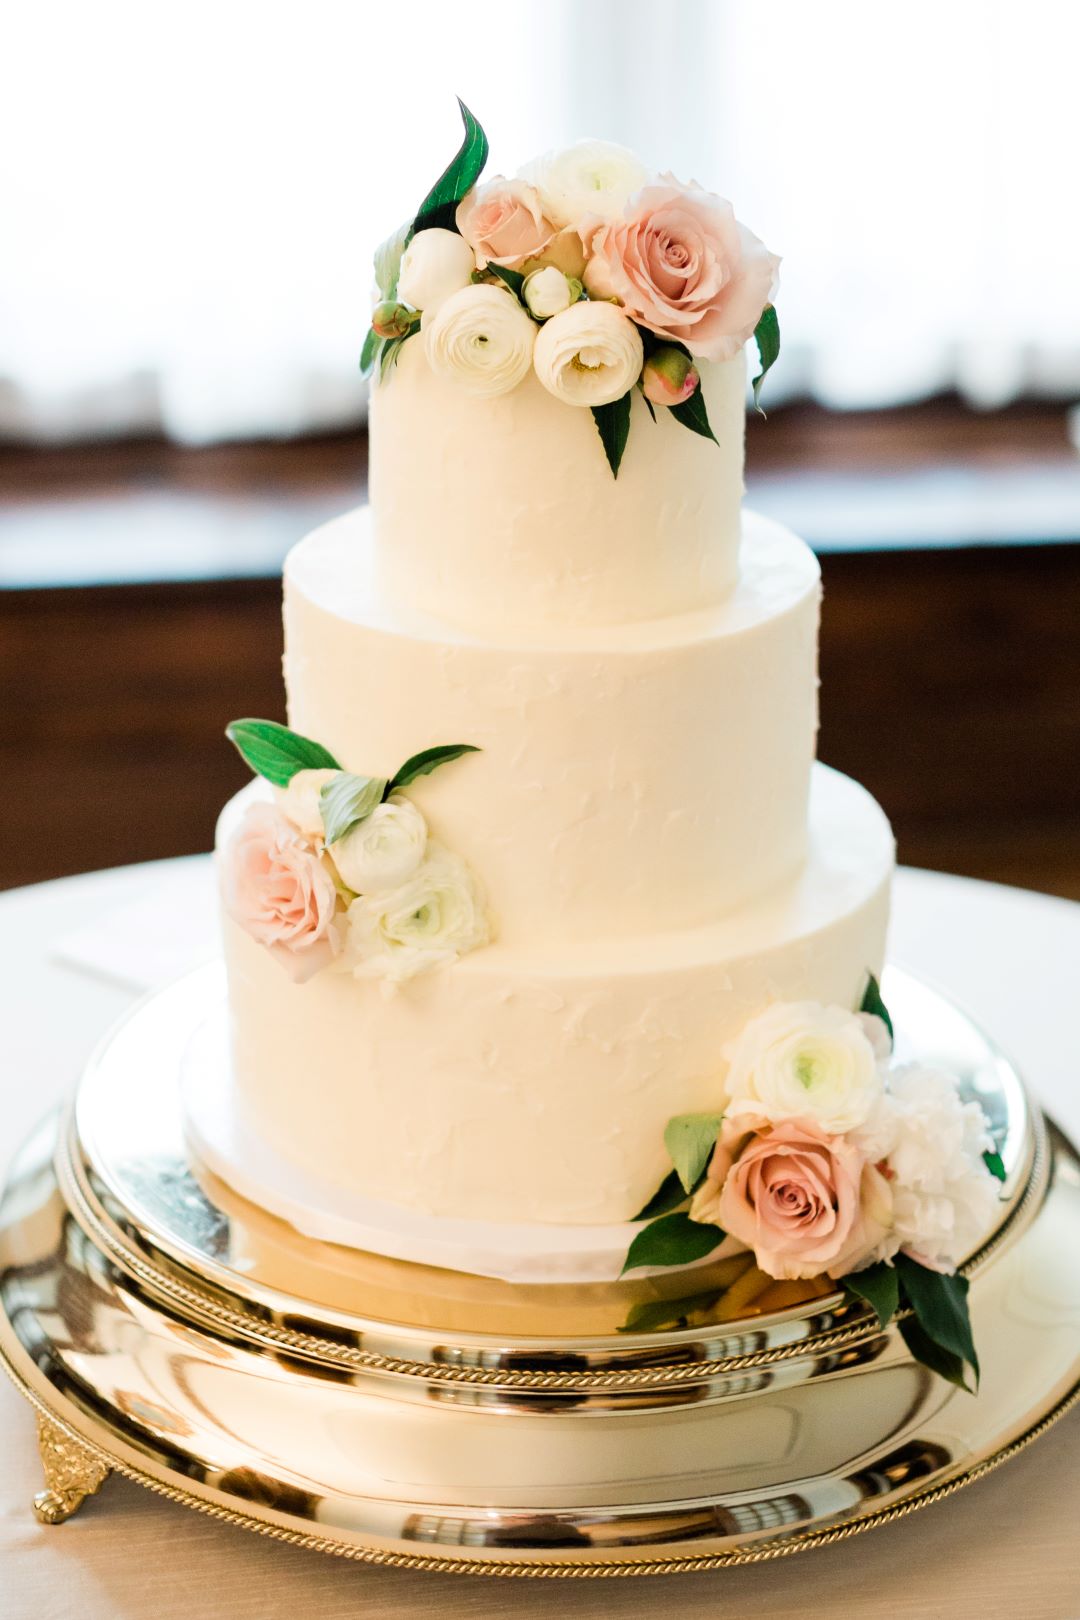 CJ's Off The Square | Simple, elegant wedding cake with blush rose accents